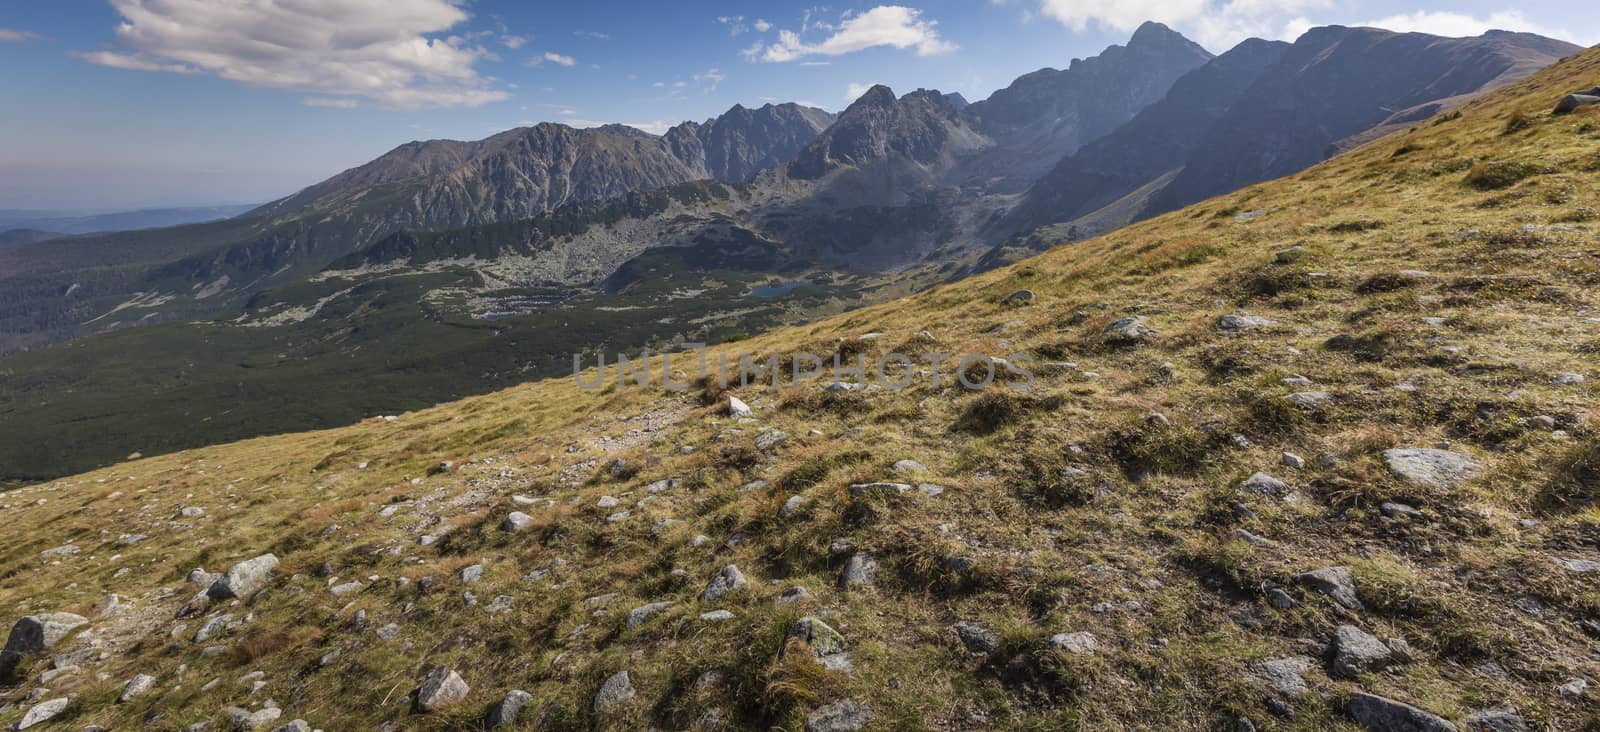 View from Kasprowy Wierch Summit in the Polish Tatra Mountains